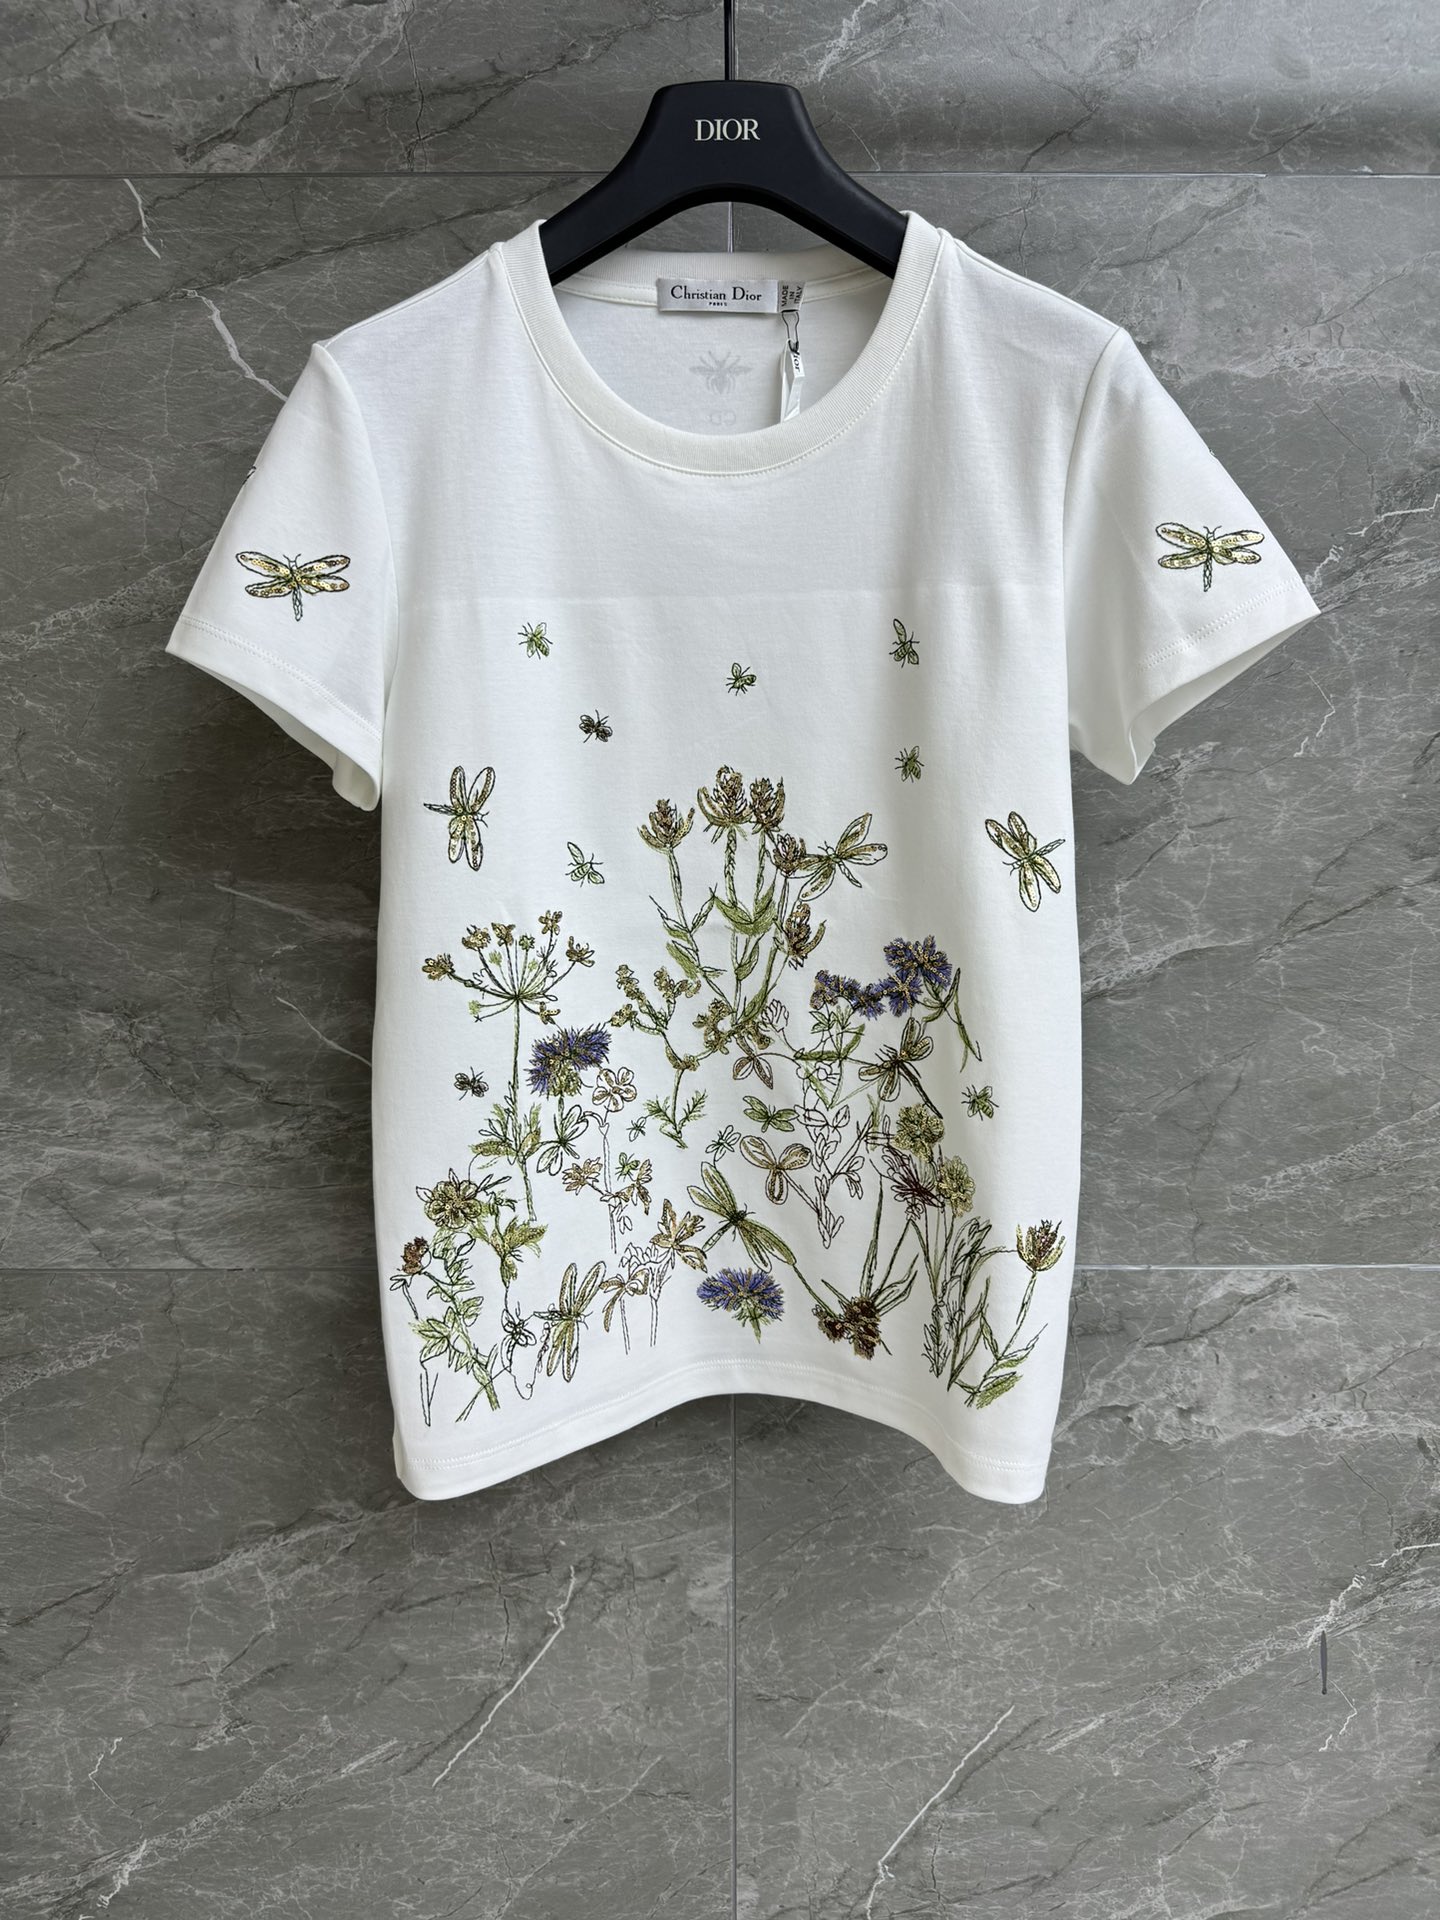 Dior Clothing T-Shirt Embroidery Cotton Spring/Summer Collection